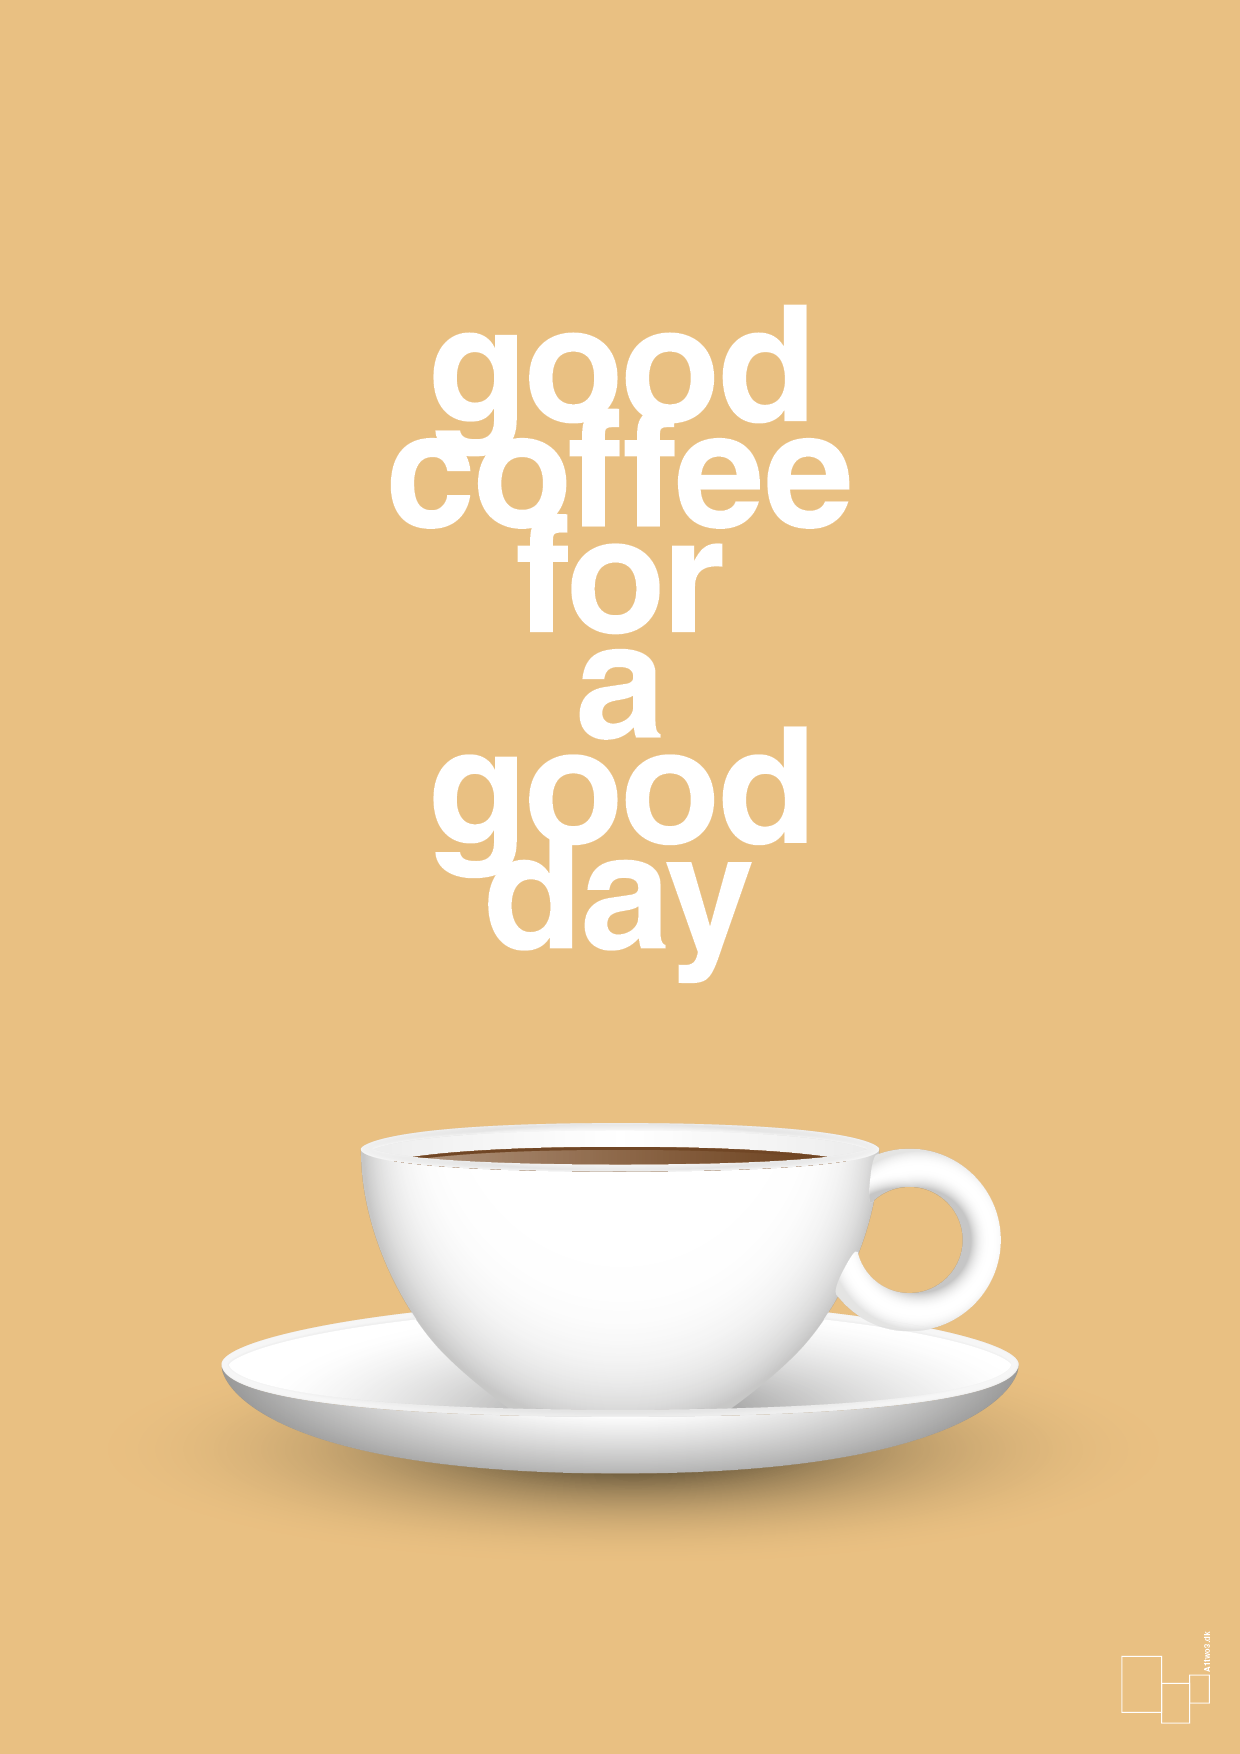 good coffee for a good day - Plakat med Mad & Drikke i Charismatic